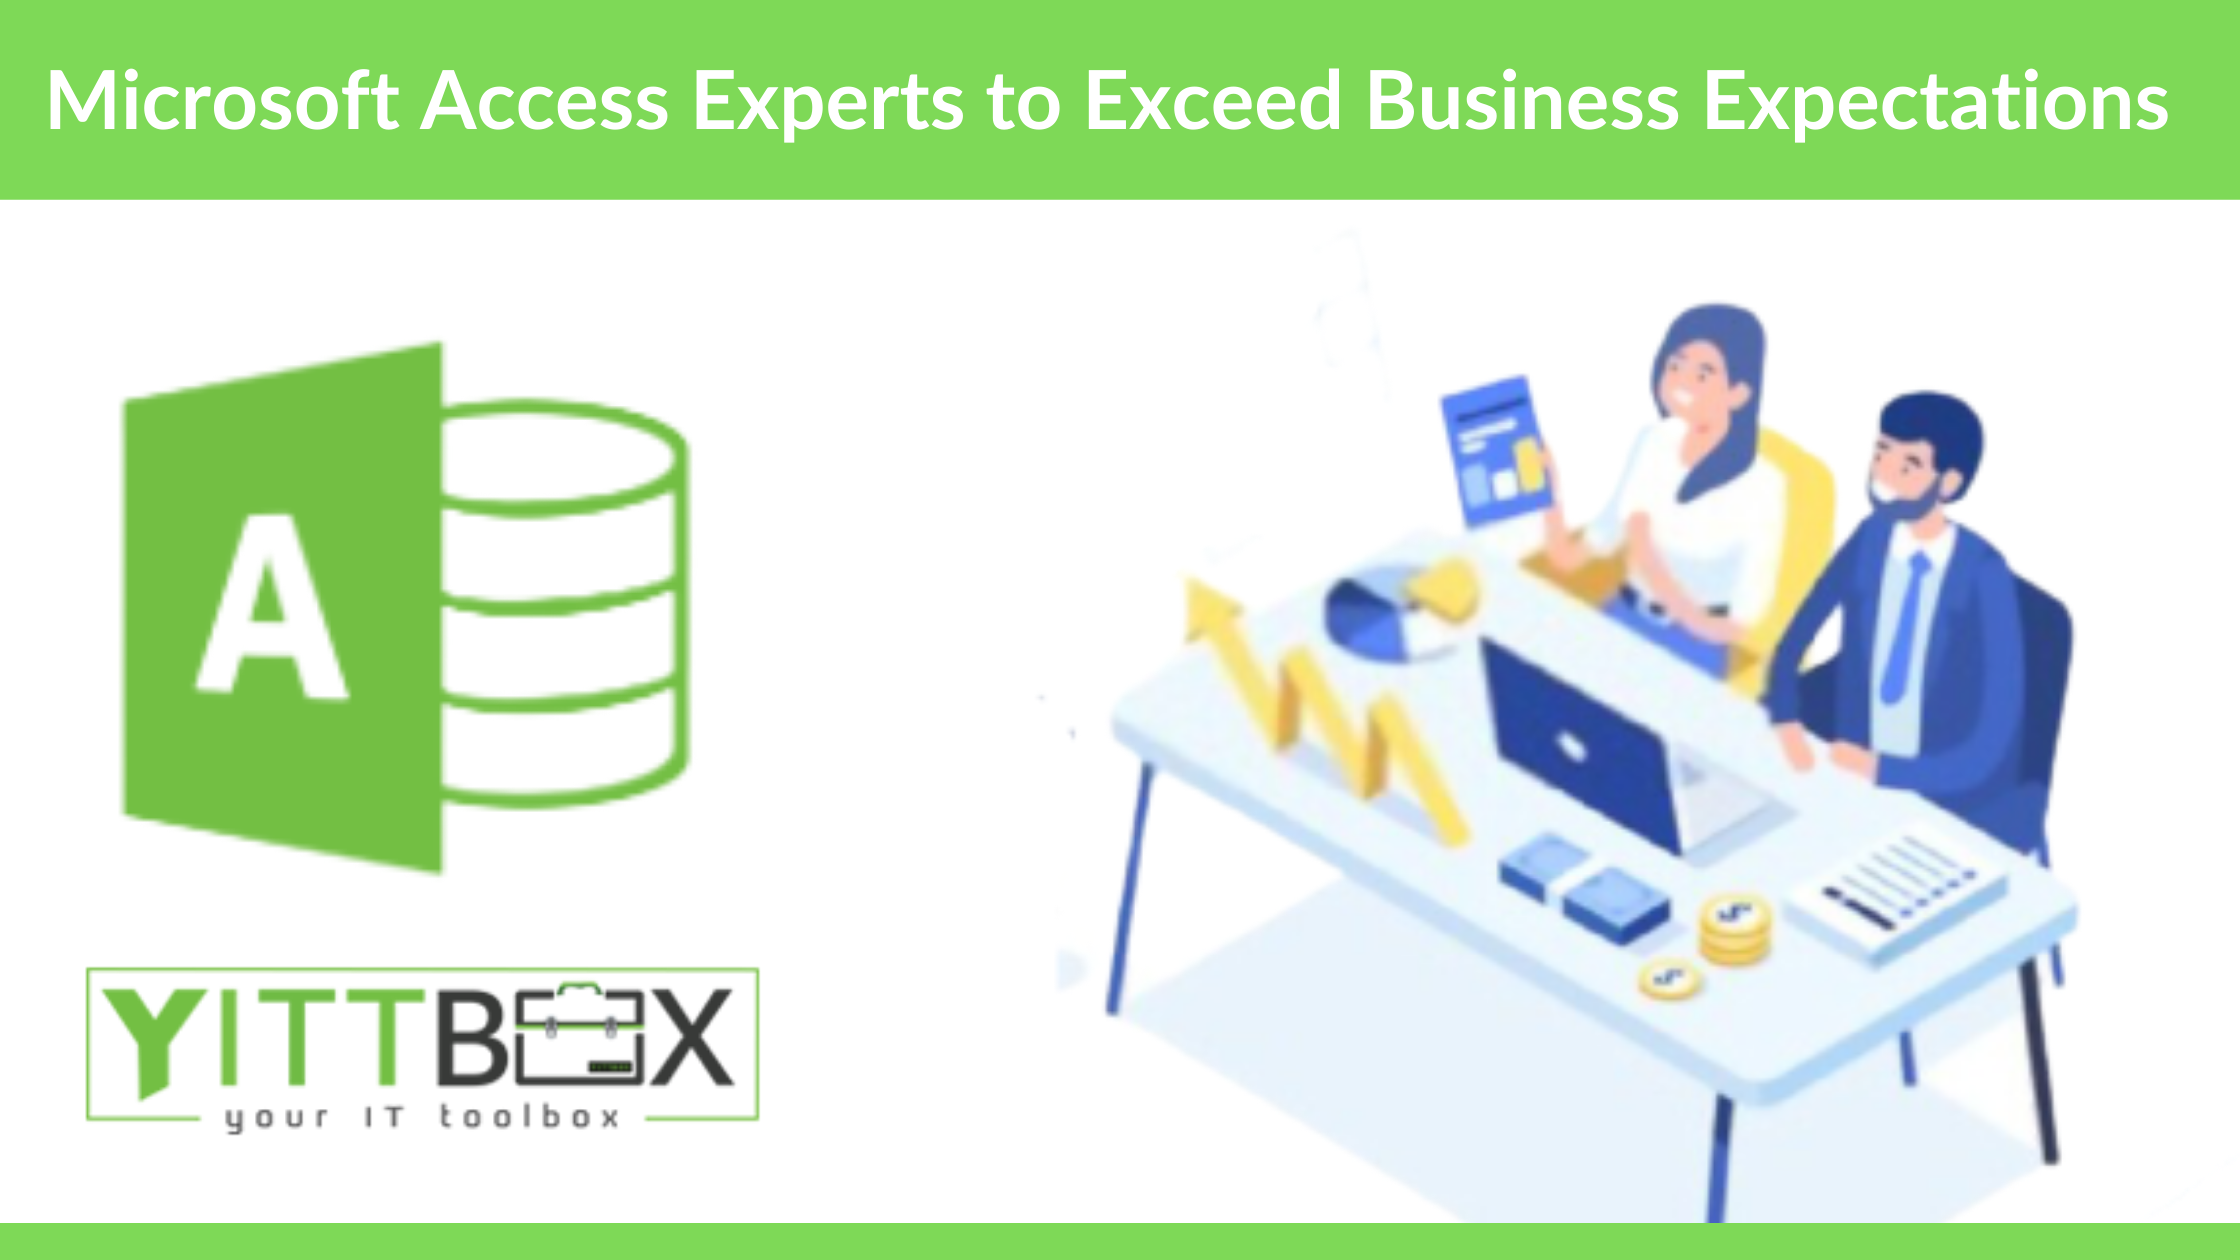 Microsoft Access Experts to Exceed Business Expectations